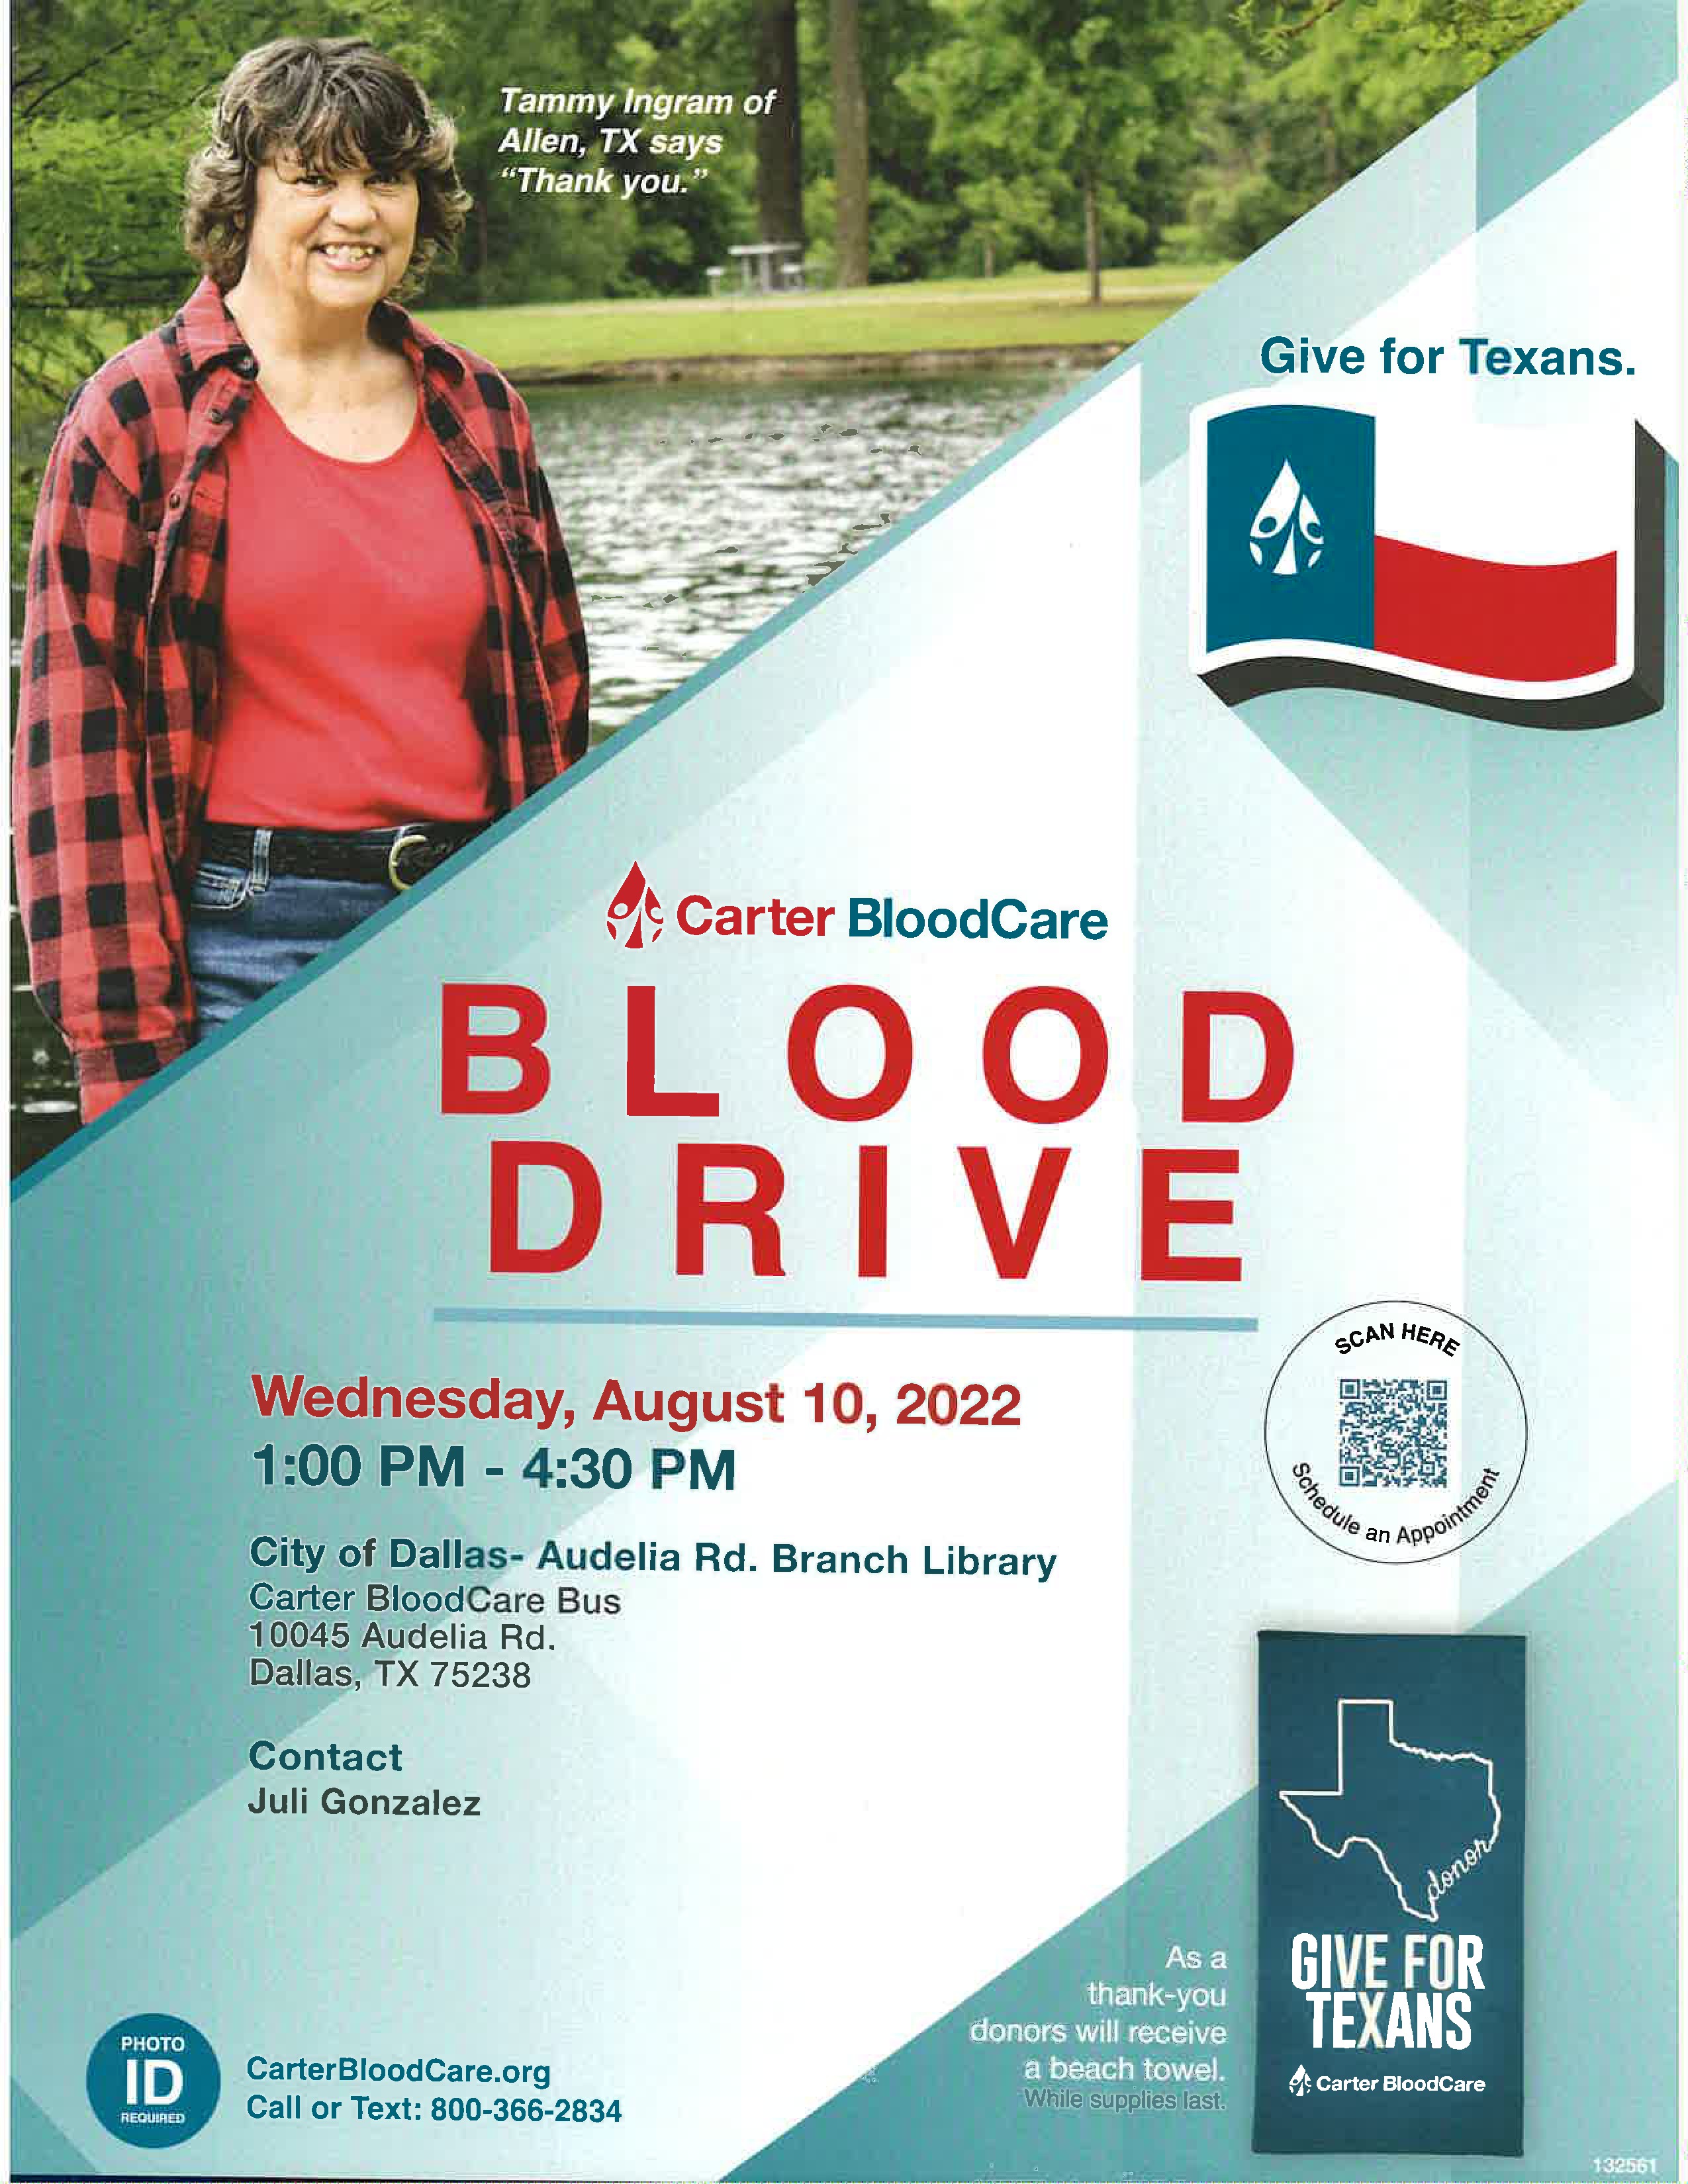 Blood Drive Flyer showing smiling woman, Texas flag, QR code